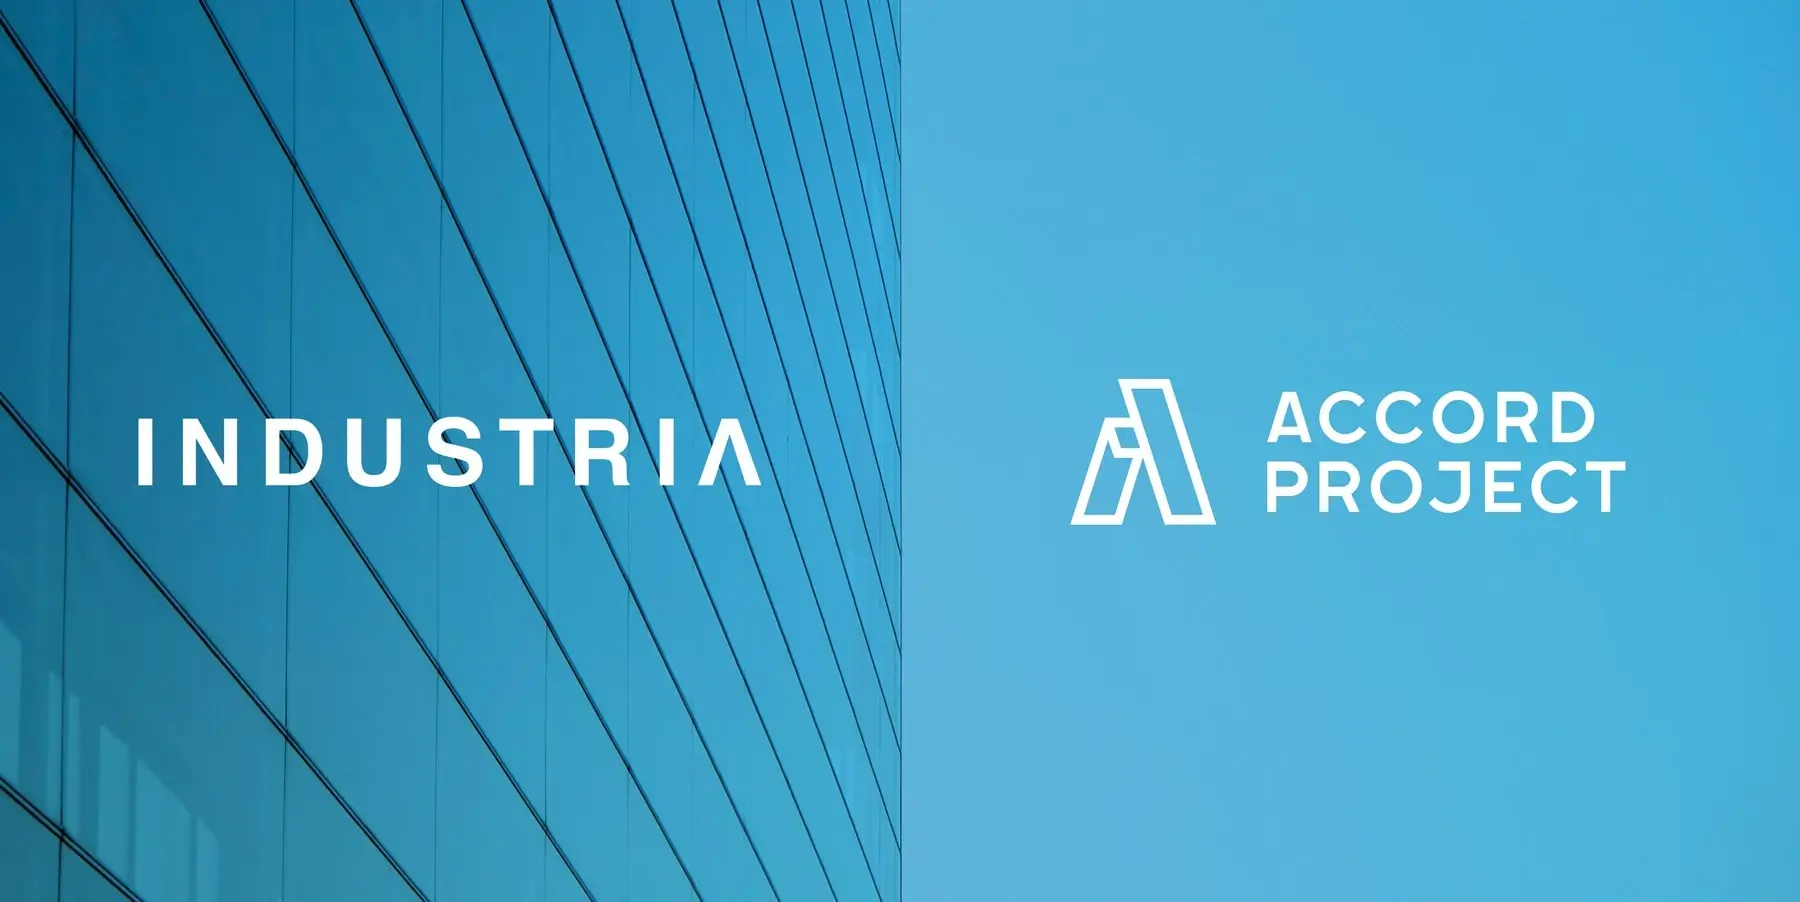 The INDUSTRIA and Accord Project logos against a corporate building on the left and a blue sky on the right.